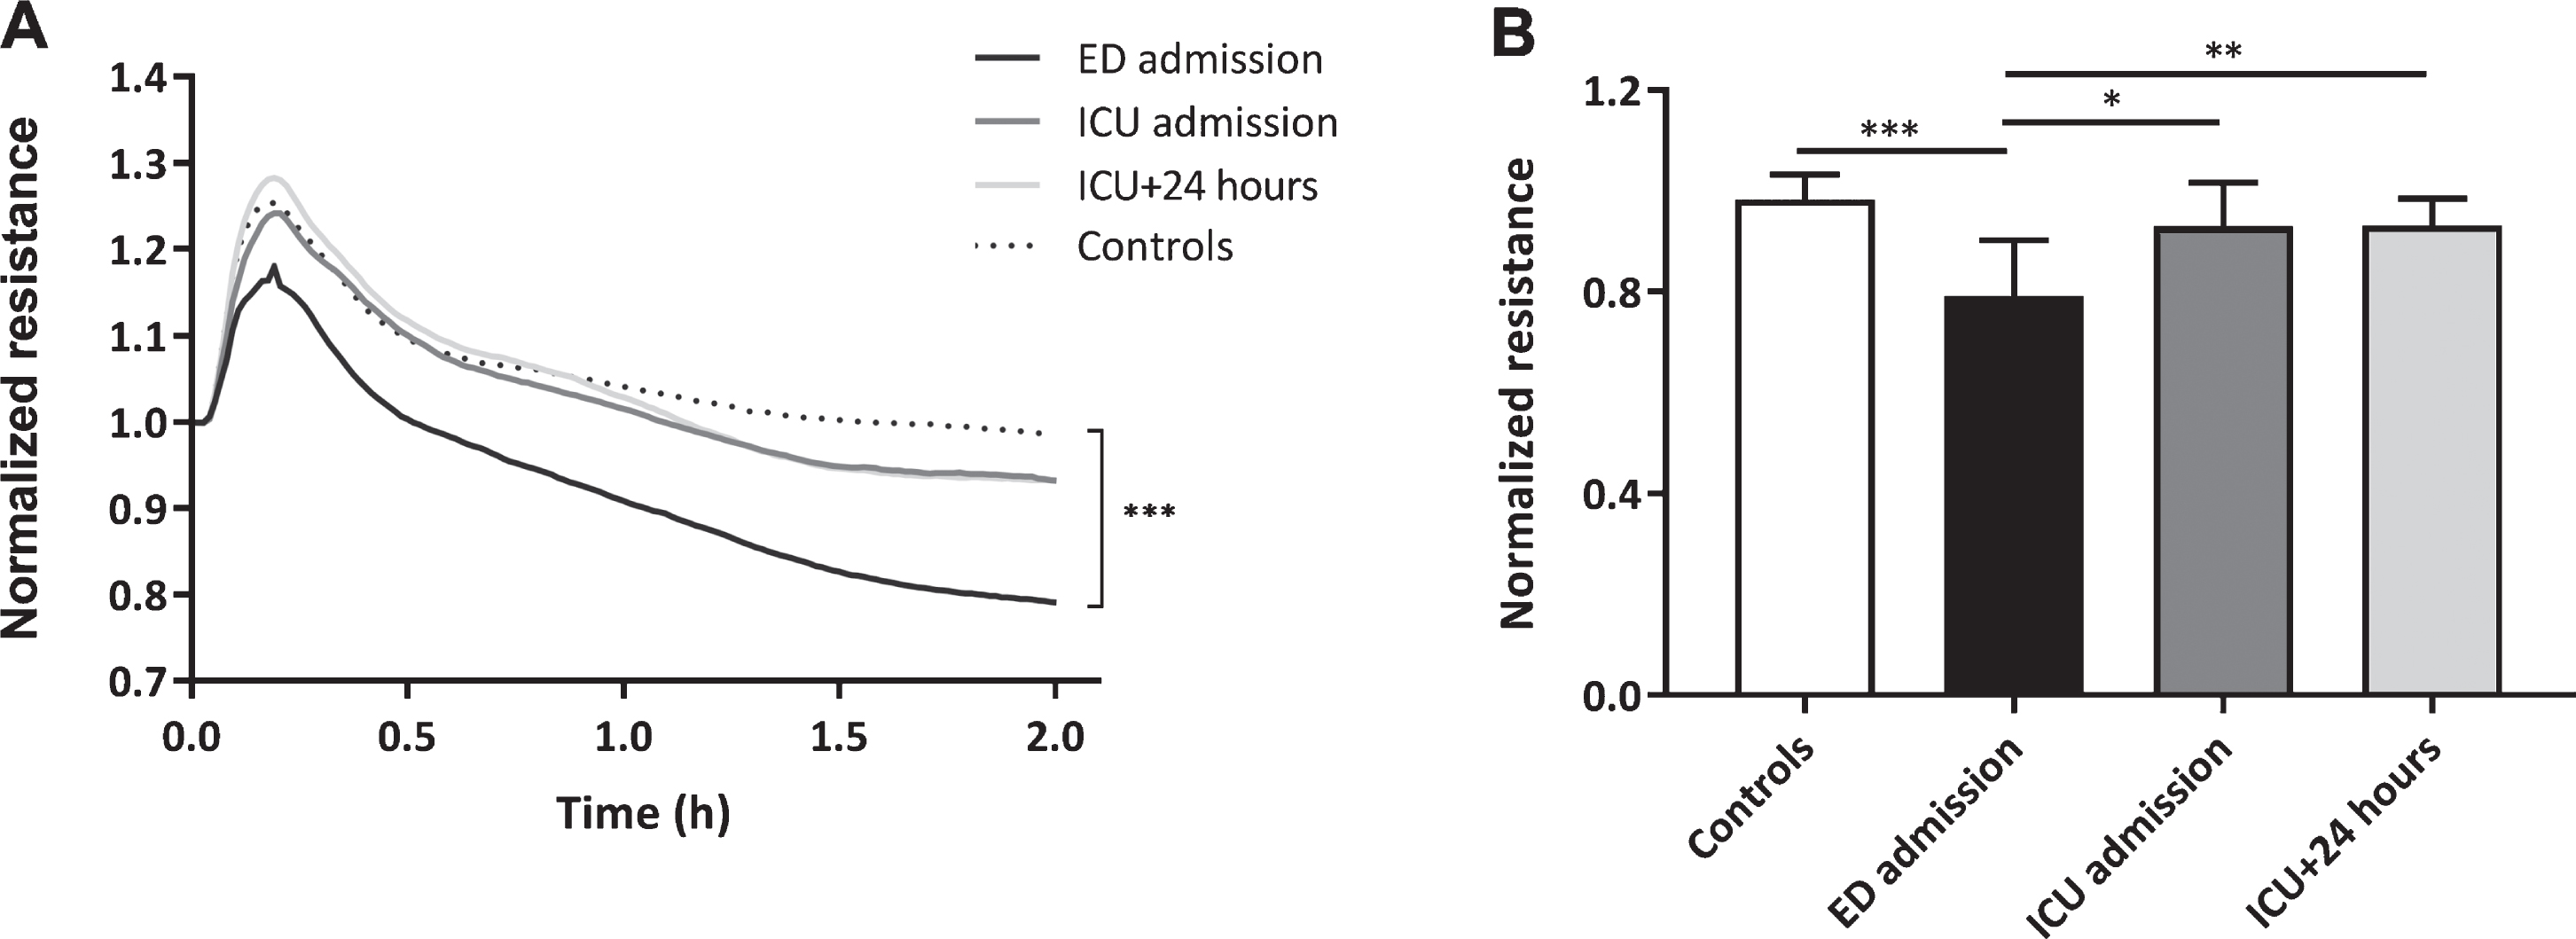 Loss of in vitro endothelial barrier function. Human endothelial cells were exposed to plasma from traumatic hemorrhagic shock patients collected at admission at the emergency department (ED), intensive care unit (ICU), 24 hours (ICU+24 h) after admission at the ICU and from controls (all n = 8). Endothelial resistance after plasma exposure over time (A) and after 2 hours of plasma exposure (B). A: Data represent mean and were tested with a two-way ANOVA with Bonferroni post-hoc analysis. B: Data represent mean±SD and were tested with a one-way ANOVA with Bonferroni post-hoc analysis. *p < 0.05, **p < 0.01, ***p < 0.001 compared to ED admission.